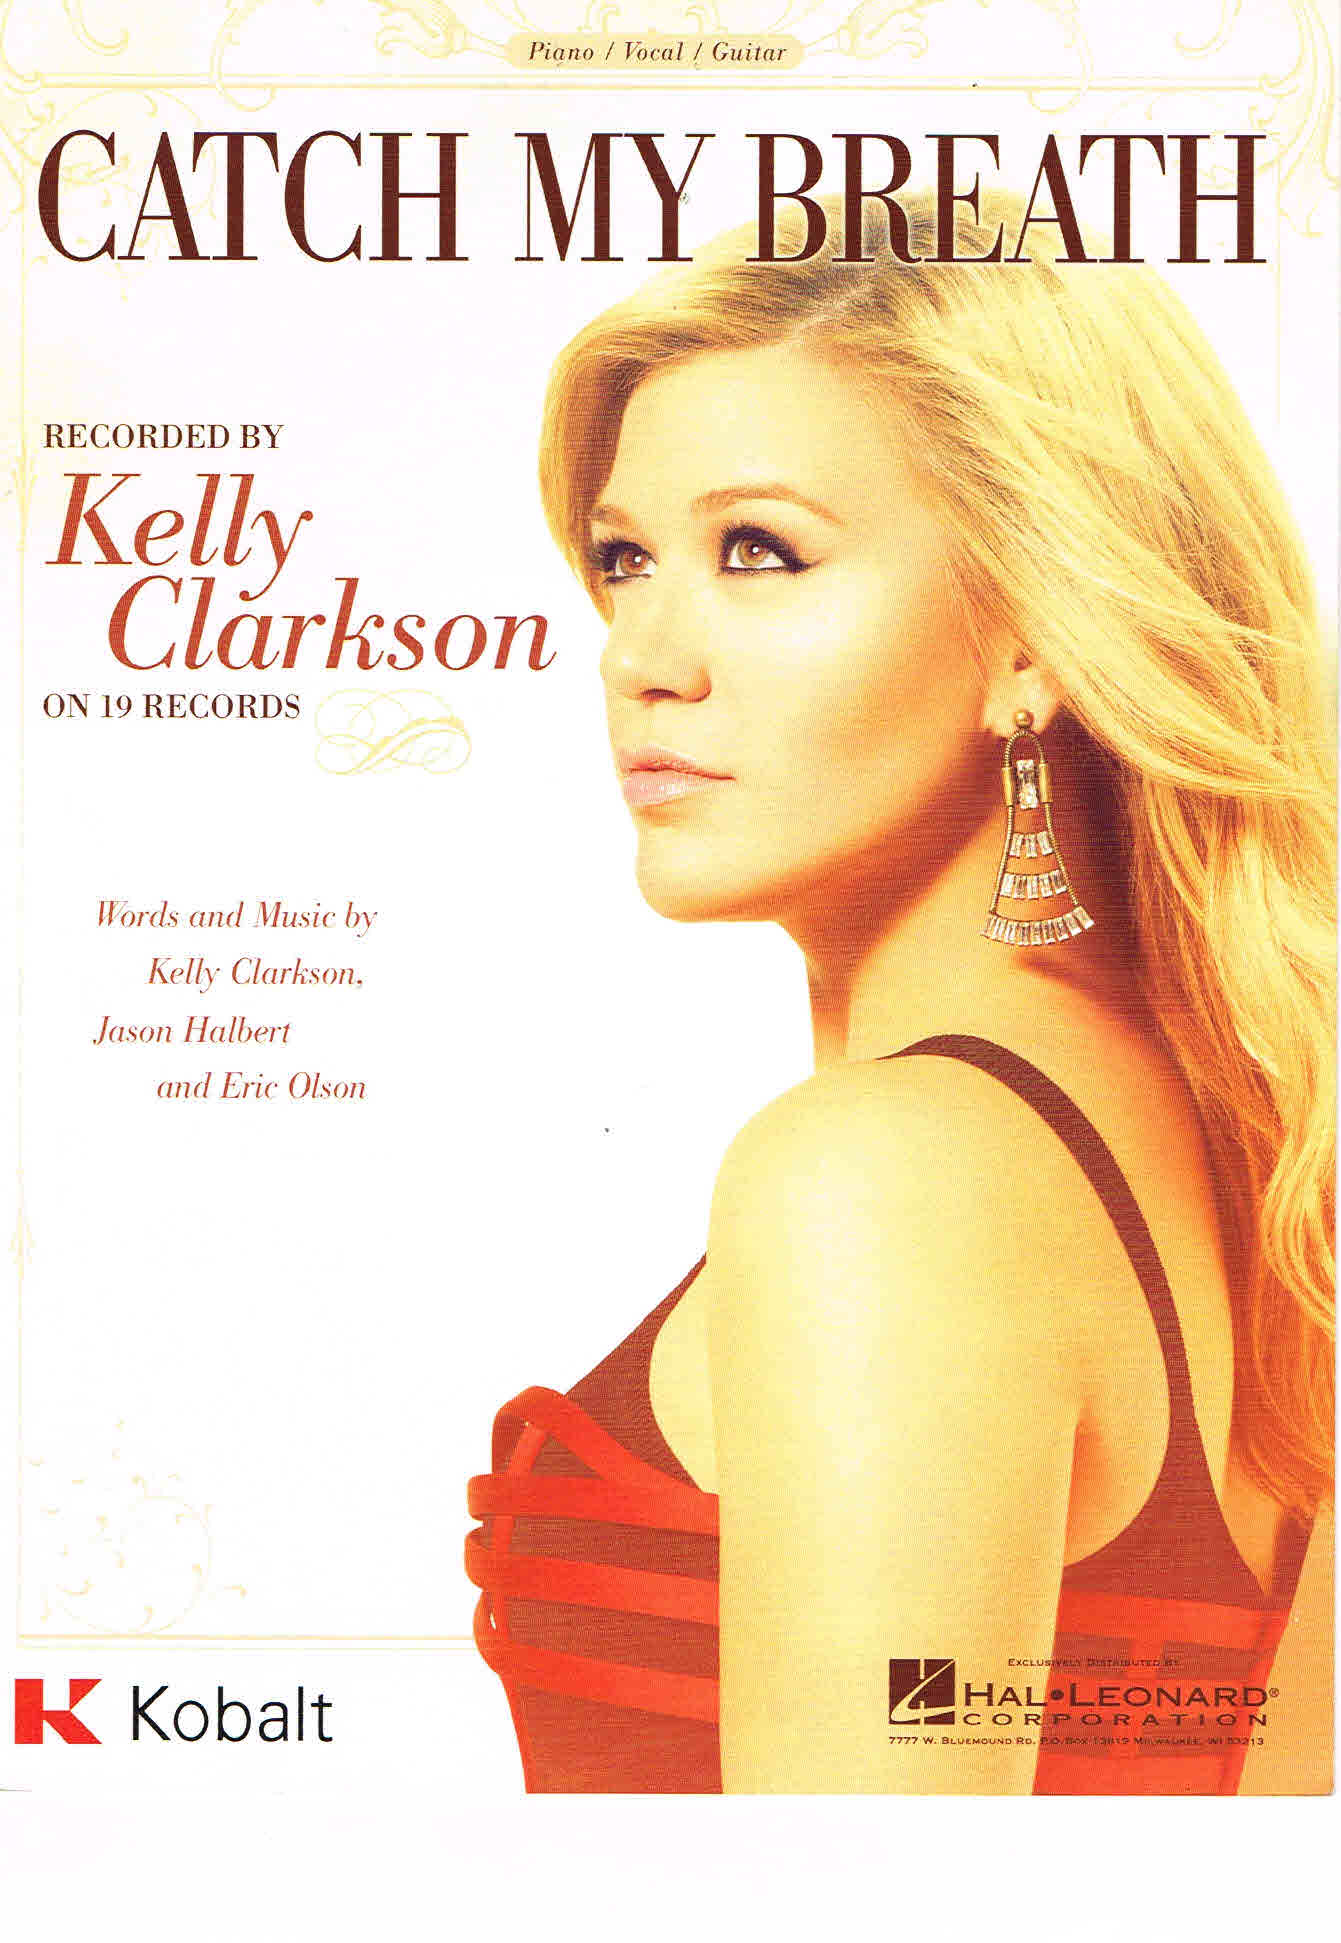 Kelly Clarkson's Catch My Breath for Piano/Vocal/Guitar (HL00118879)  - Picture 1 of 1